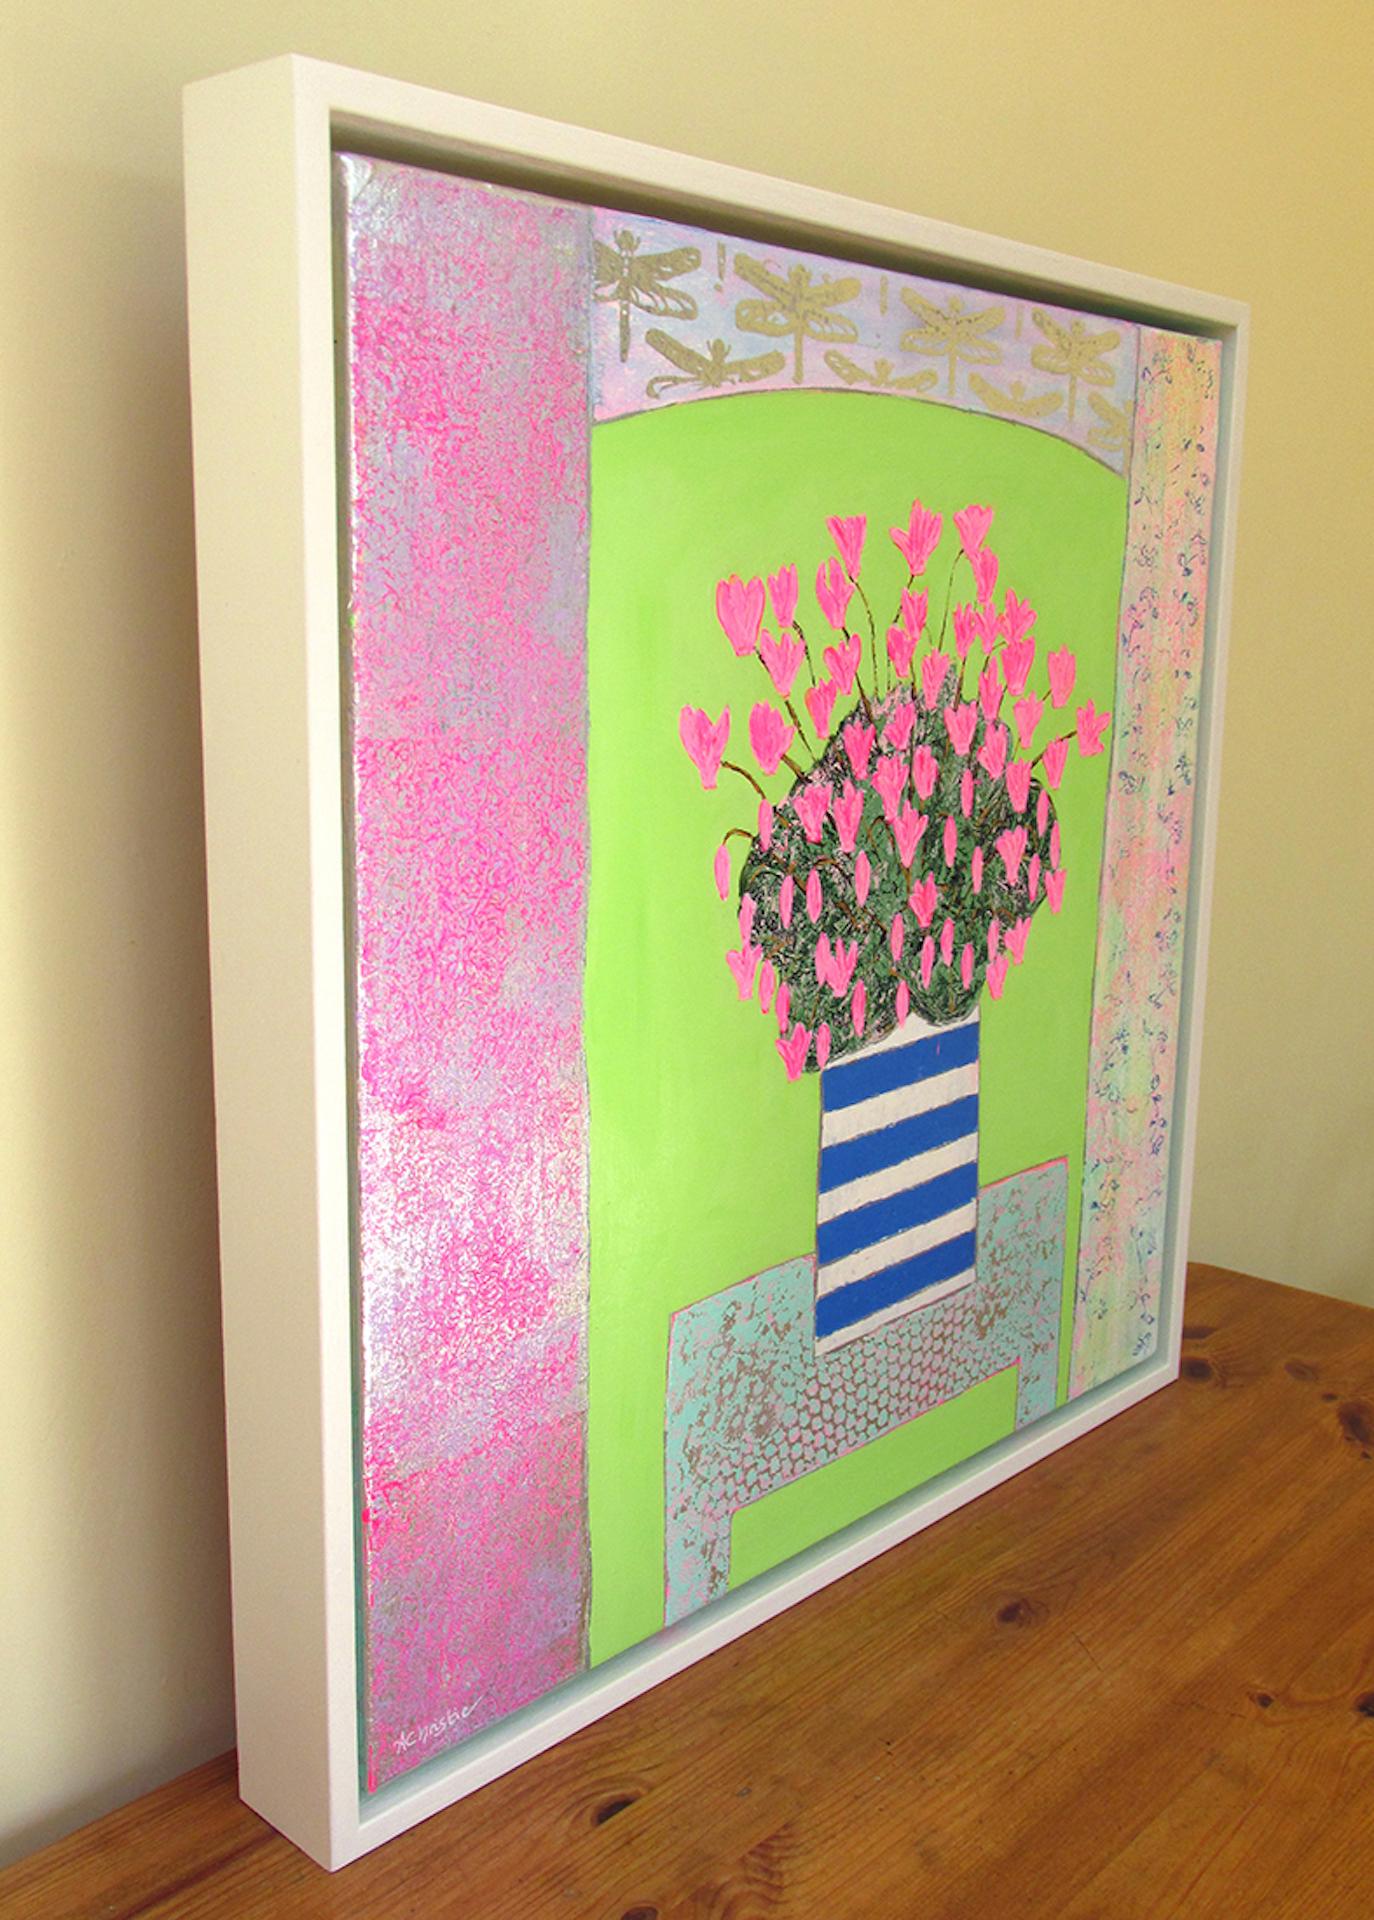 Amy Christie
Pink Cyclamens on Lime Green
Original Still Life Painting
Mixed Media on Canvas
Canvas Size: H 50cm x W 50cm
Framed Size: H 54cm x W 54 cm x D 3.5cm
Framed in a White Wooden Handpainted Tray Frame

Pink Cyclamens on Lime Green is an